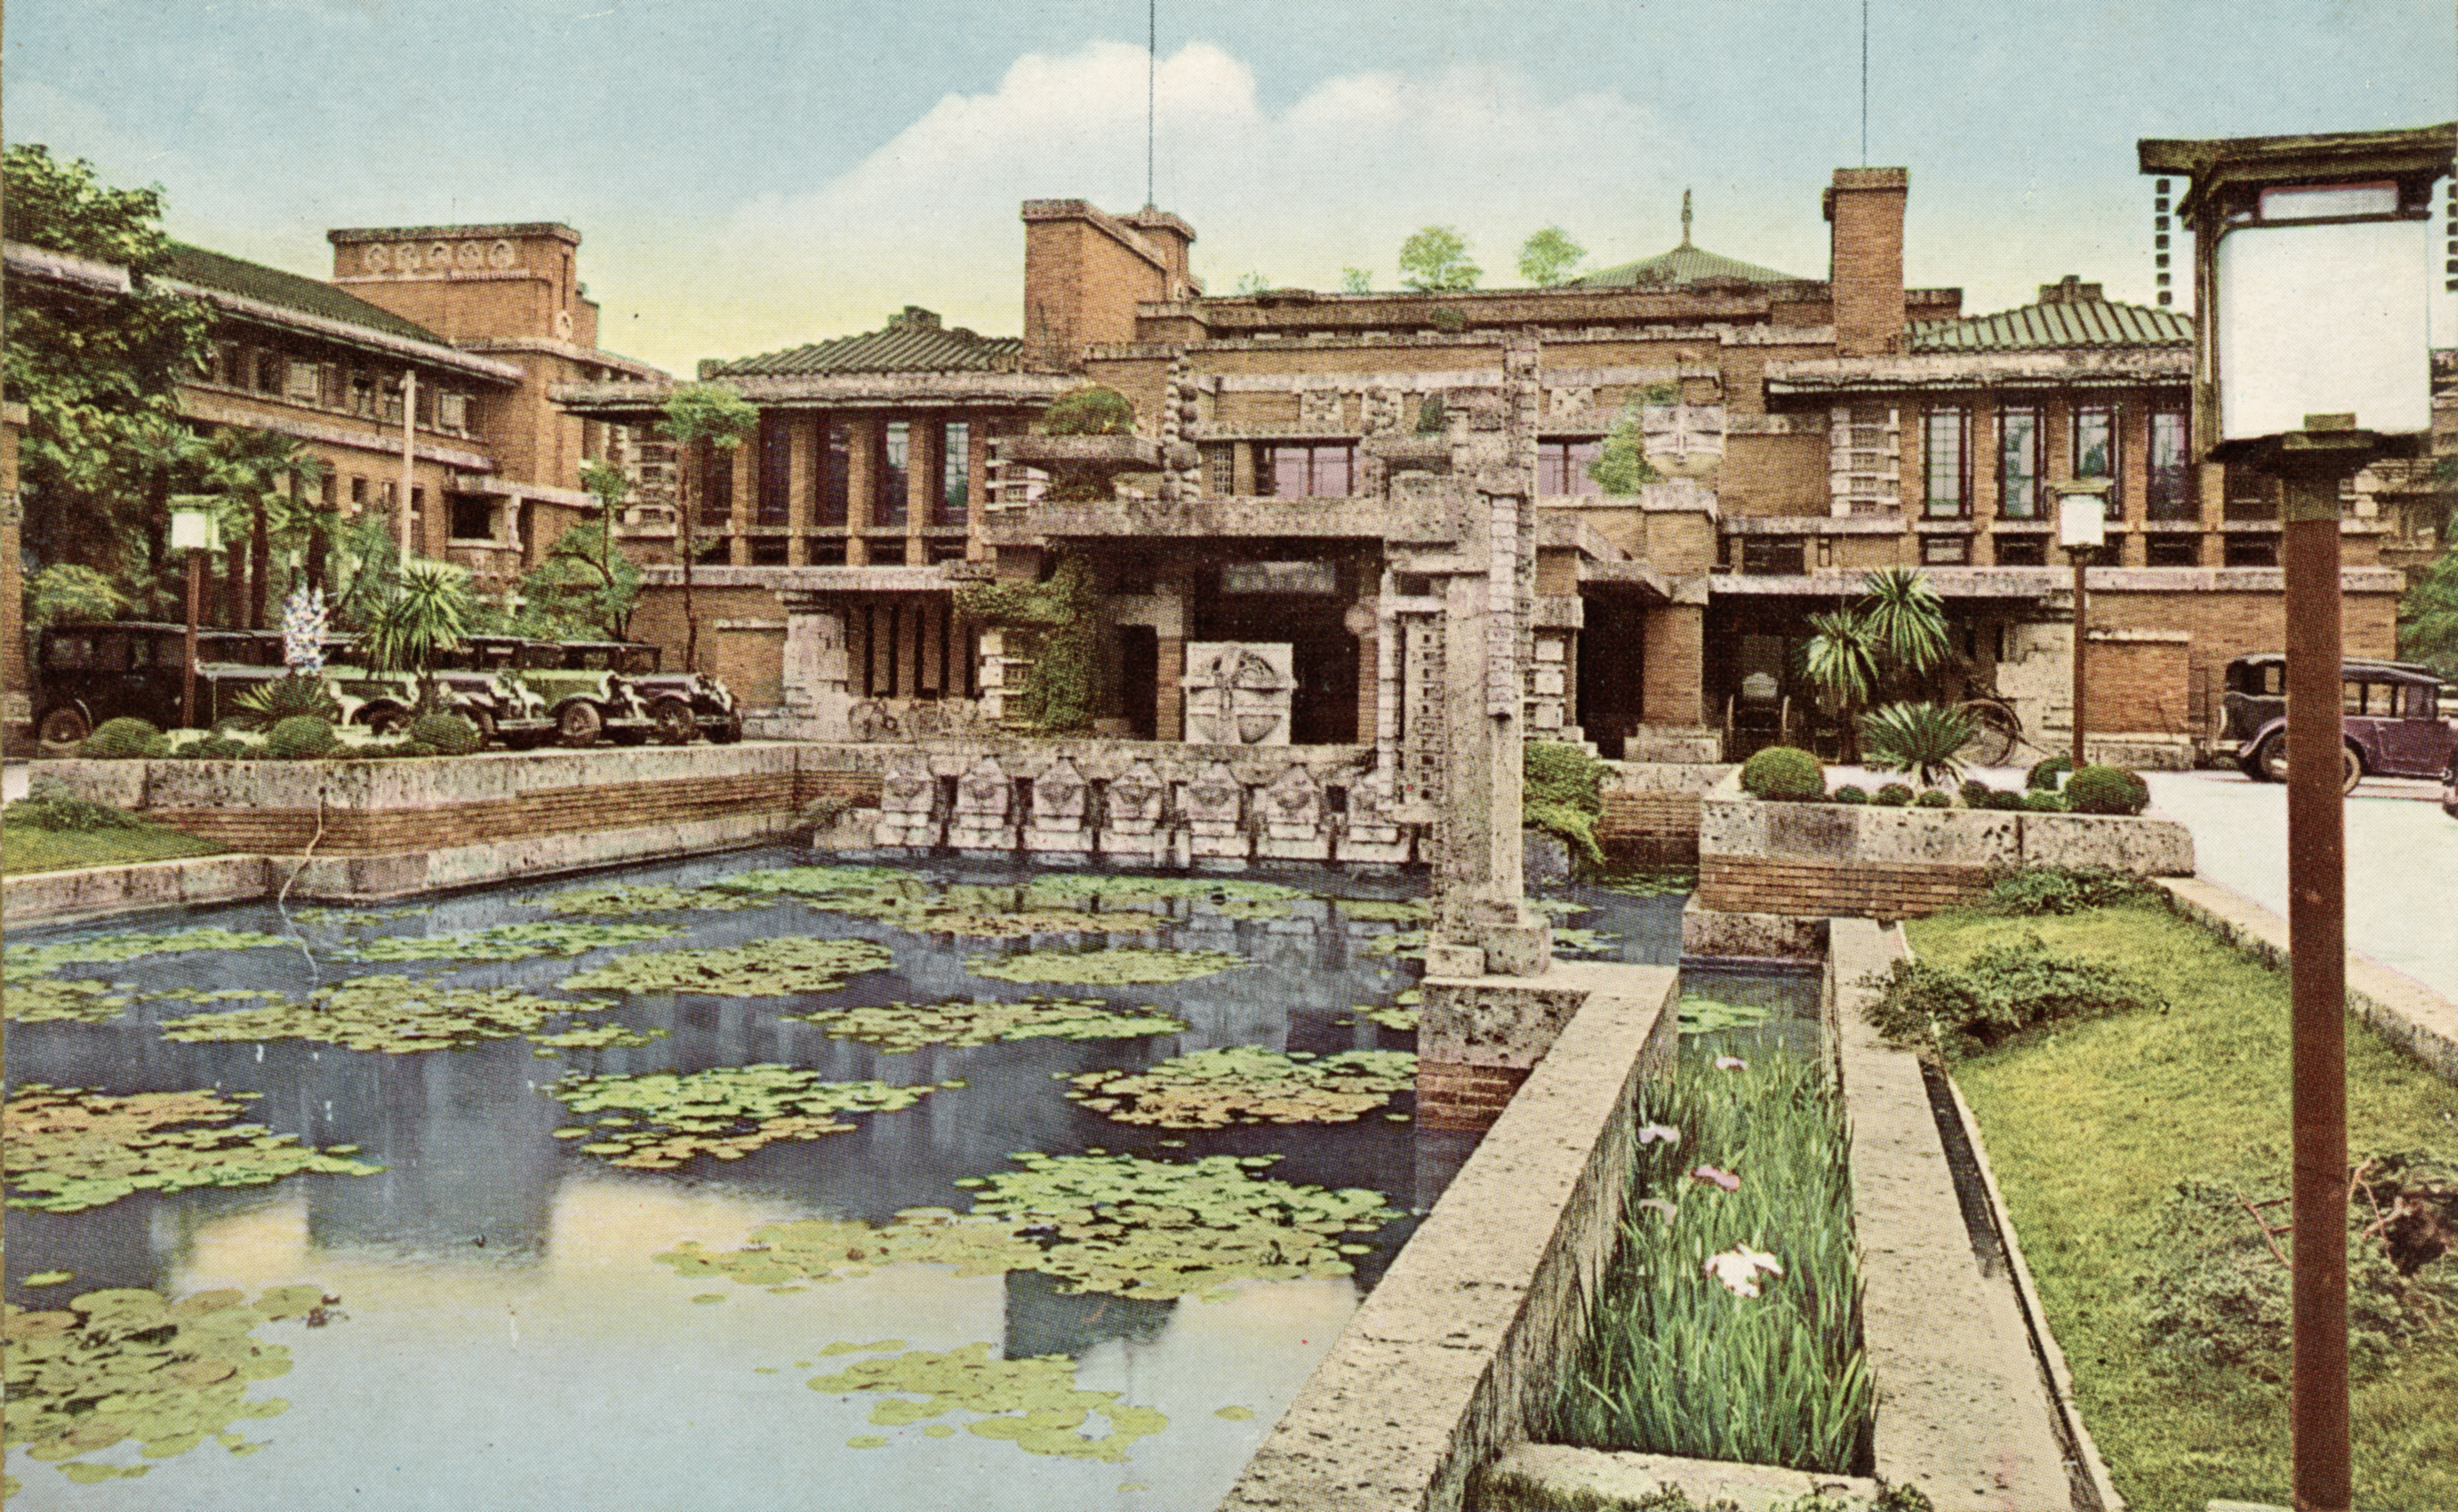 The Imperial Hotel Tokyo, designed by Frank Lloyd Wright, demolished in 1968  (Photo by Hulton Archive/Getty Images)